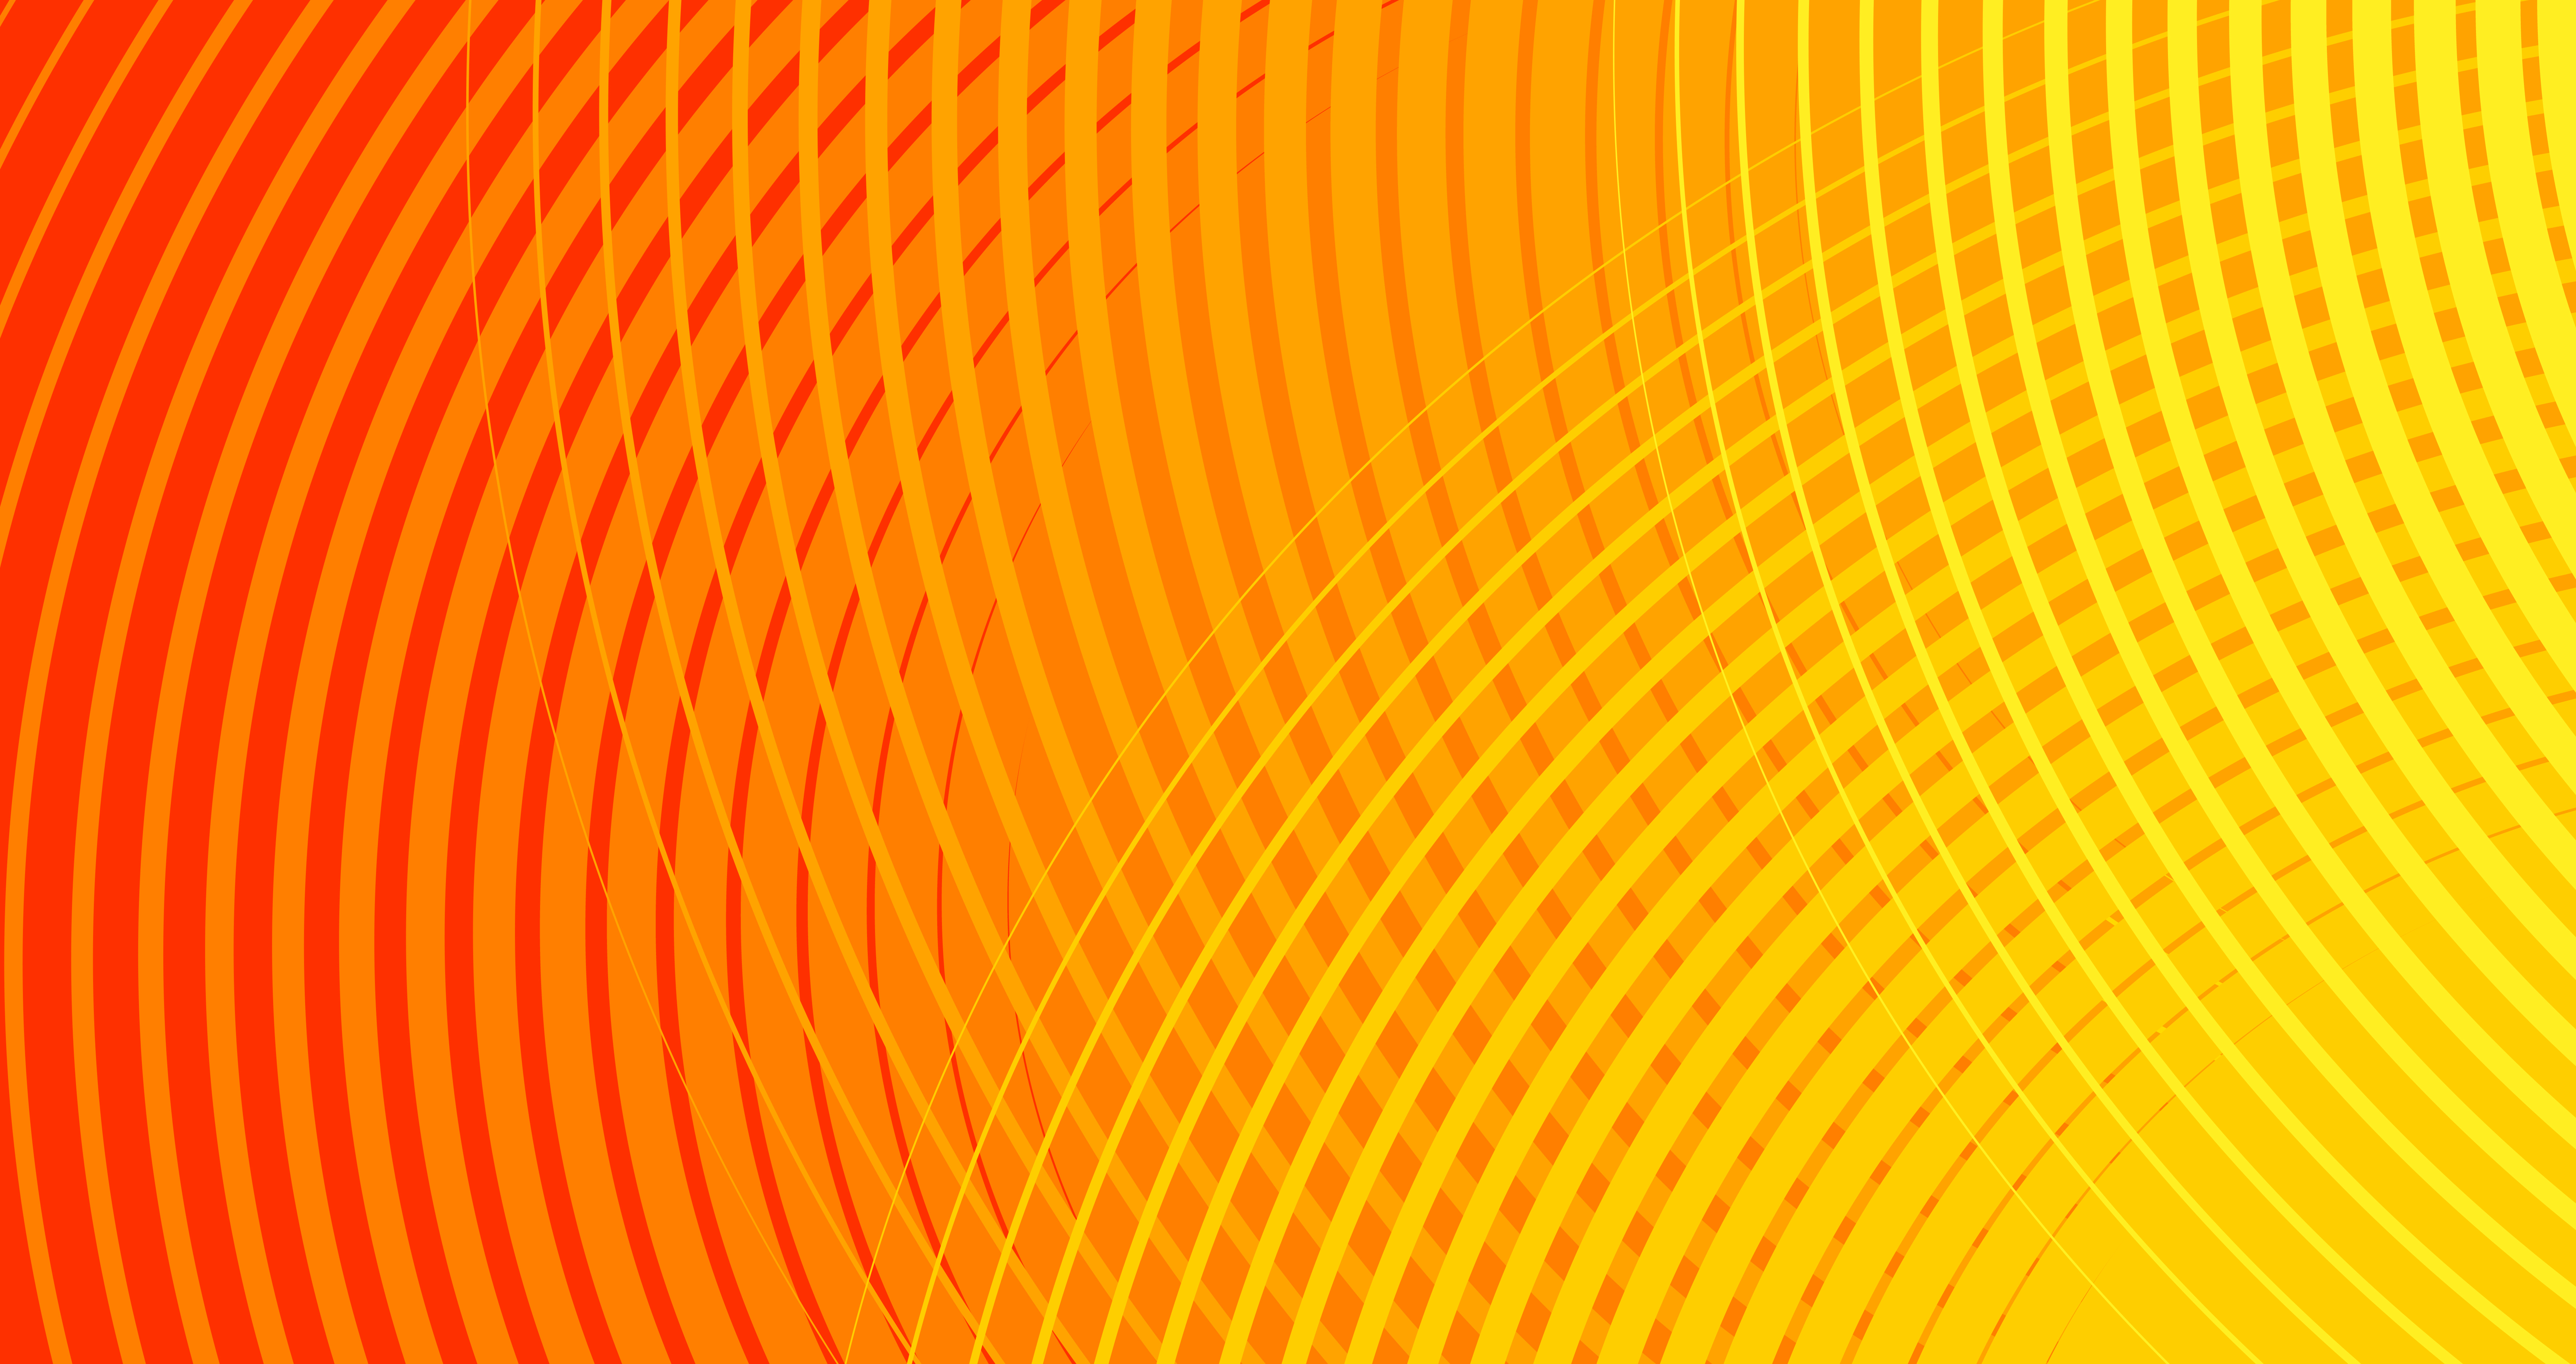 Layered Lines Gradient Abstract Background 965380 - Download Free